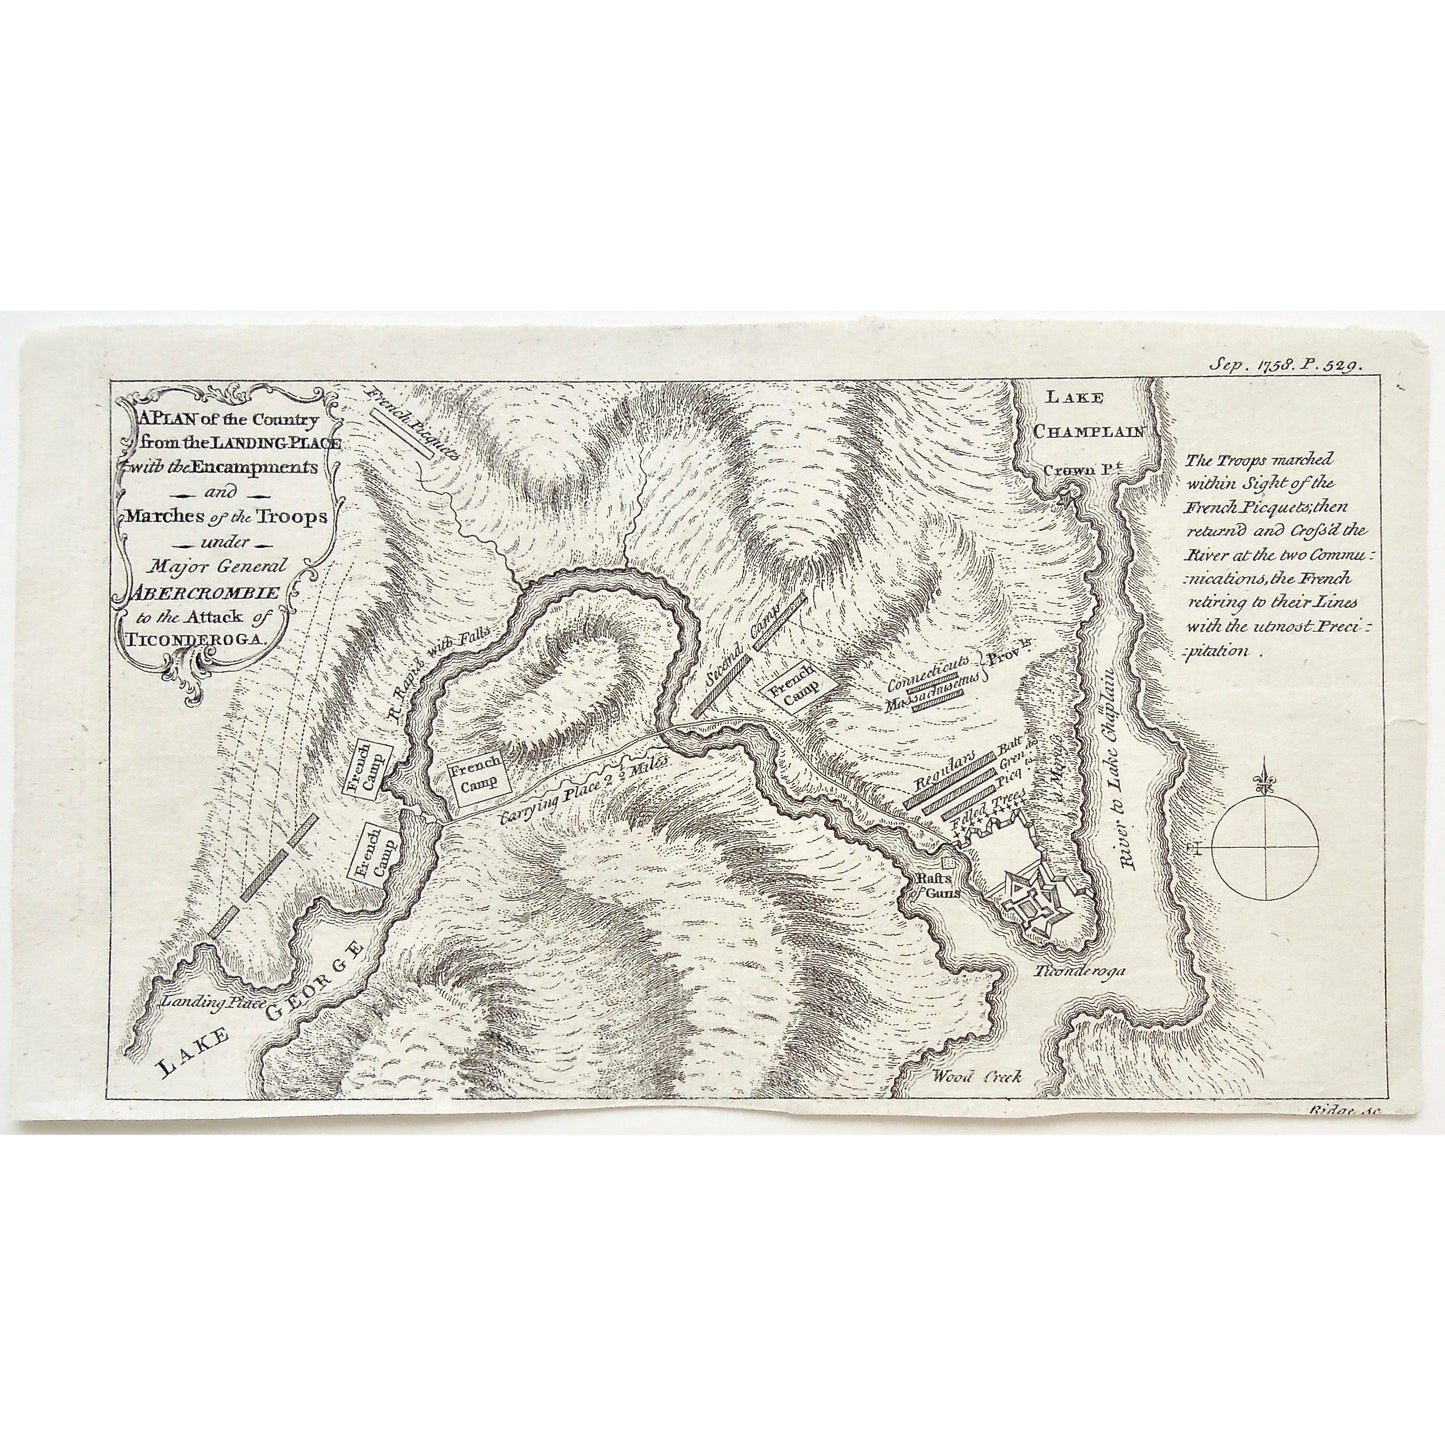 Plan, Landing Place, Encampments, Marches of the Troops, Marches, Troops, Major General Abercrombie, Abercrombie, Attack of Ticonderoga, Attack, Ticonderoga, Lake George, French Camp, French encampments, River Rapid with Falls, French Picquets, Carrying Place, Second Camp, Raft of Guns, Wood Creek, River to Lake Champlain, Lake Champlain, Crown Point, Connecticut, Massachusetts, Regulars, Ridge, Antique Prints, Antique, Prints, Original, Map, Maps, Map making, Rare Maps, Plans, Chart, Charts, Charting, art,